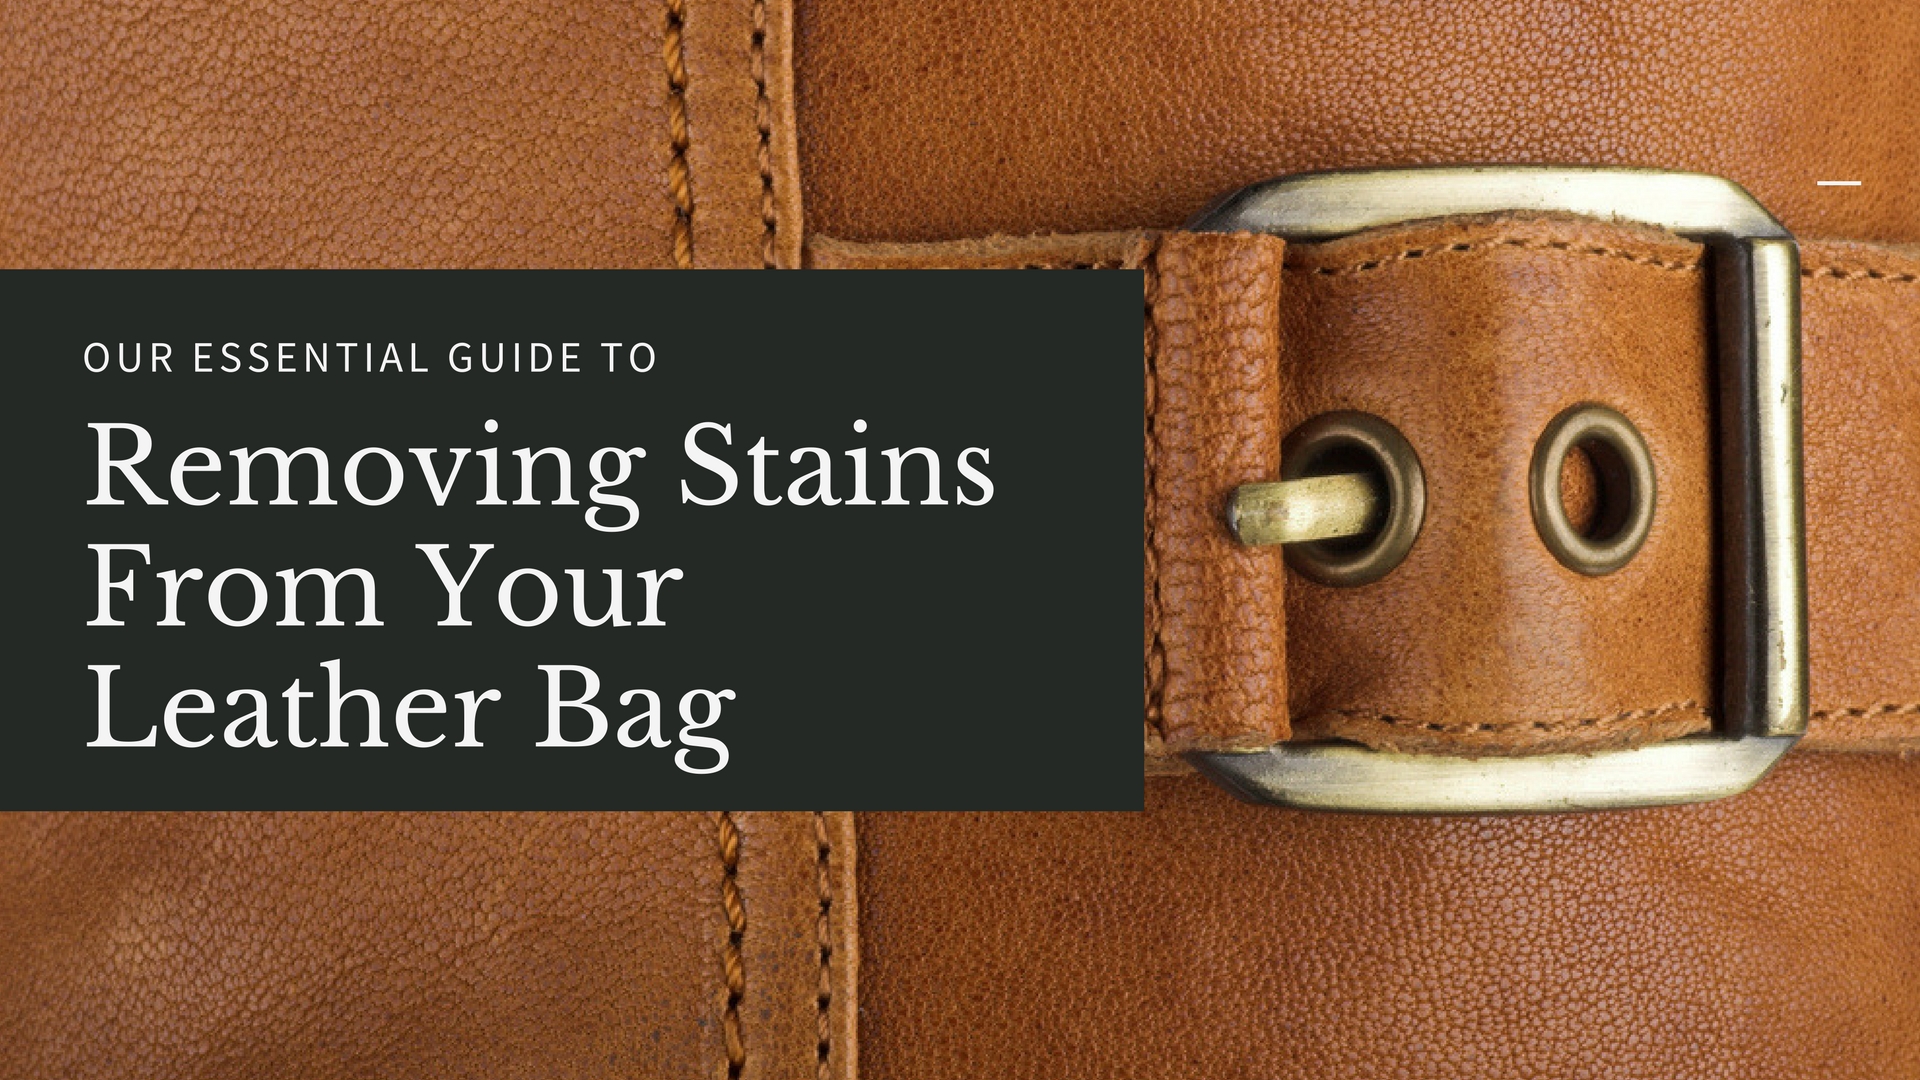 How To Remove Stains From Leather Bags, Removing Oil Stains From Leather